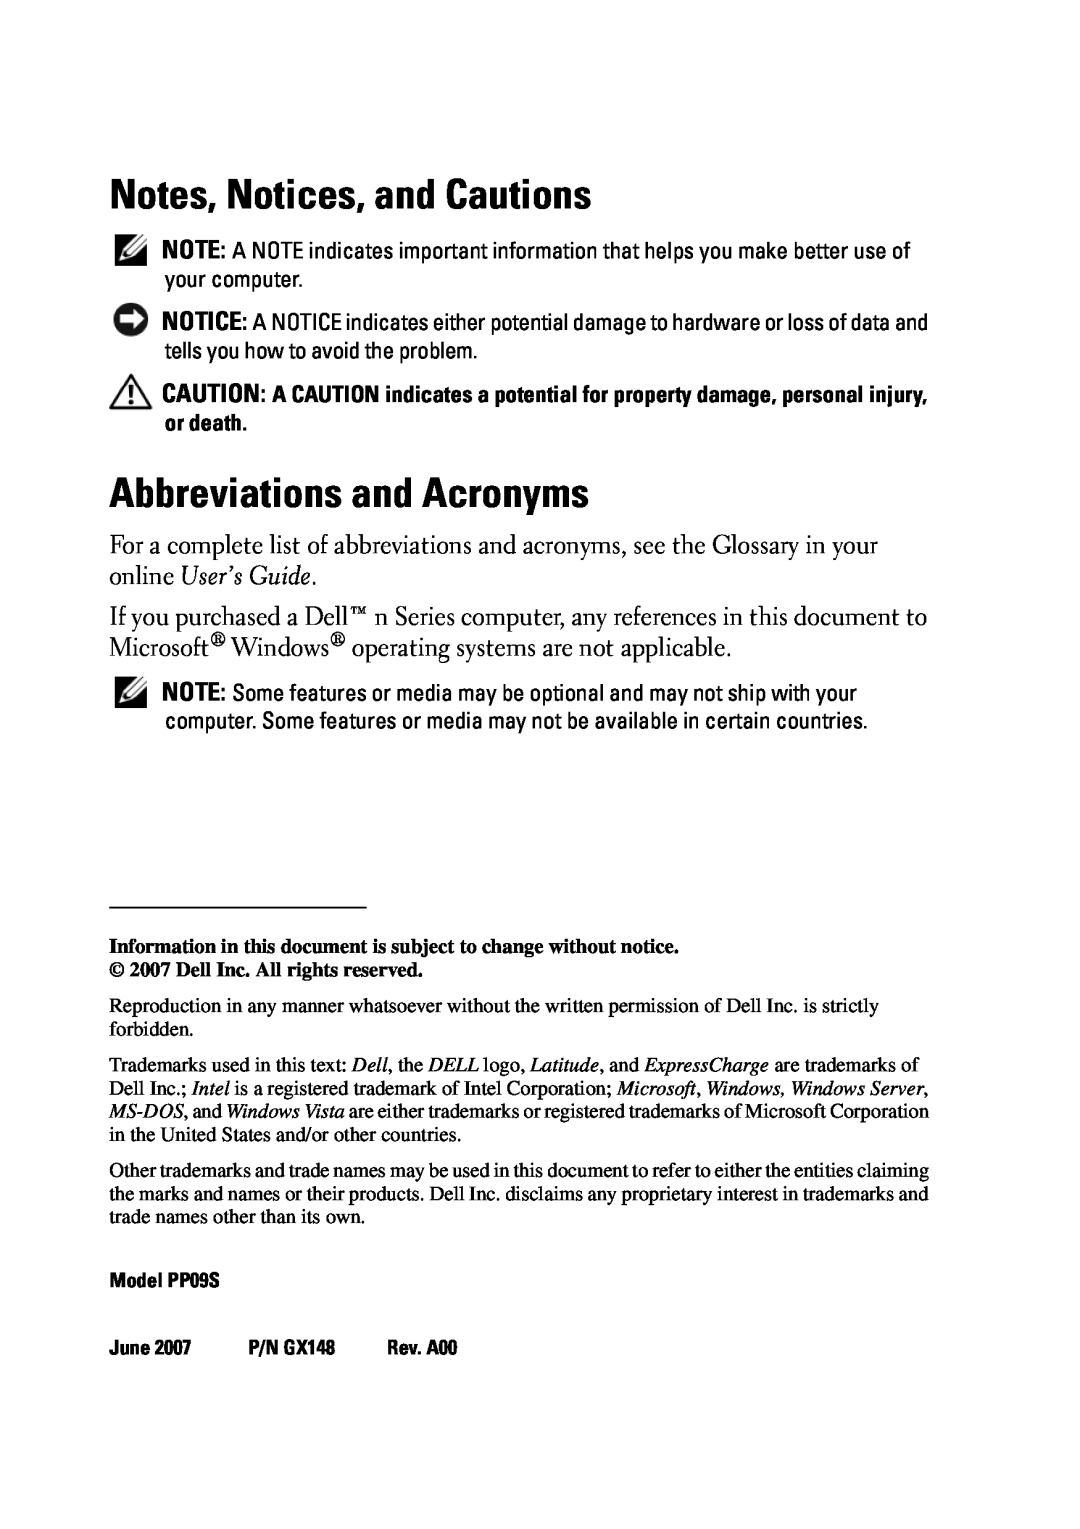 Dell D430 manual Notes, Notices, and Cautions, Abbreviations and Acronyms, Model PP09S, June, P/N GX148 